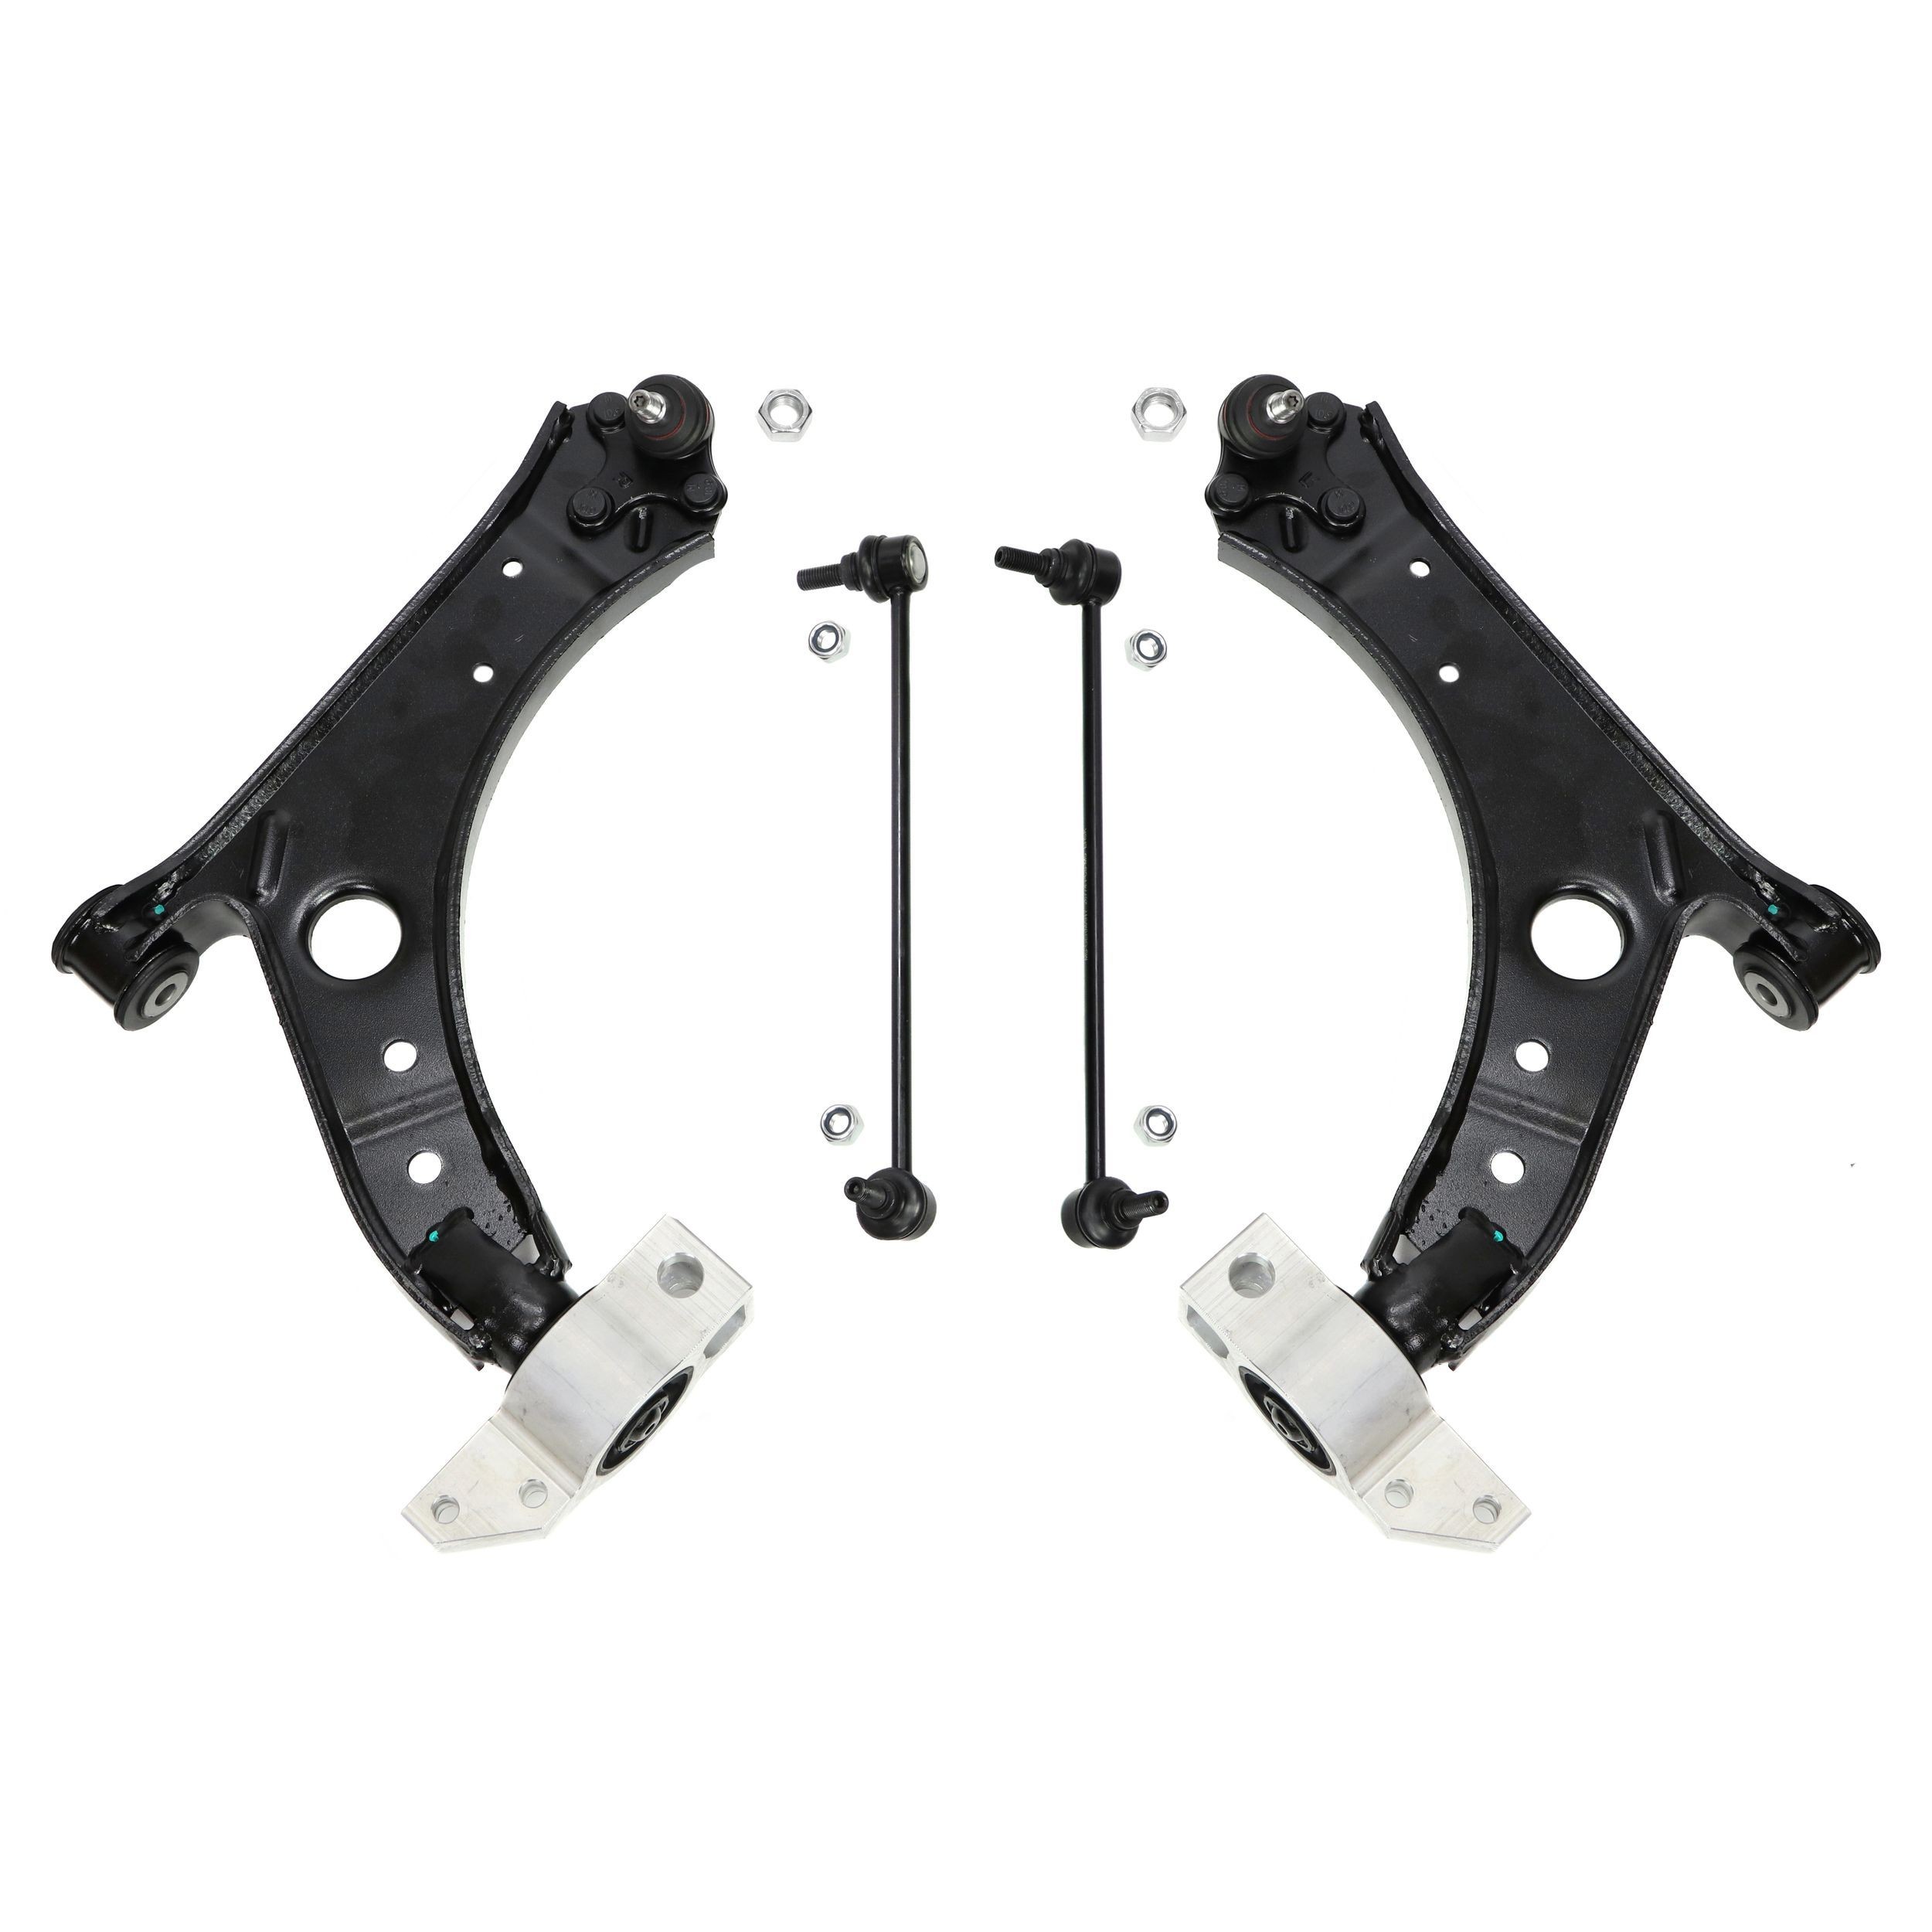 MASTER-SPORT Suspension upgrade kit rear and front VW Golf VI Convertible (517) new 36865/1-KIT-MS